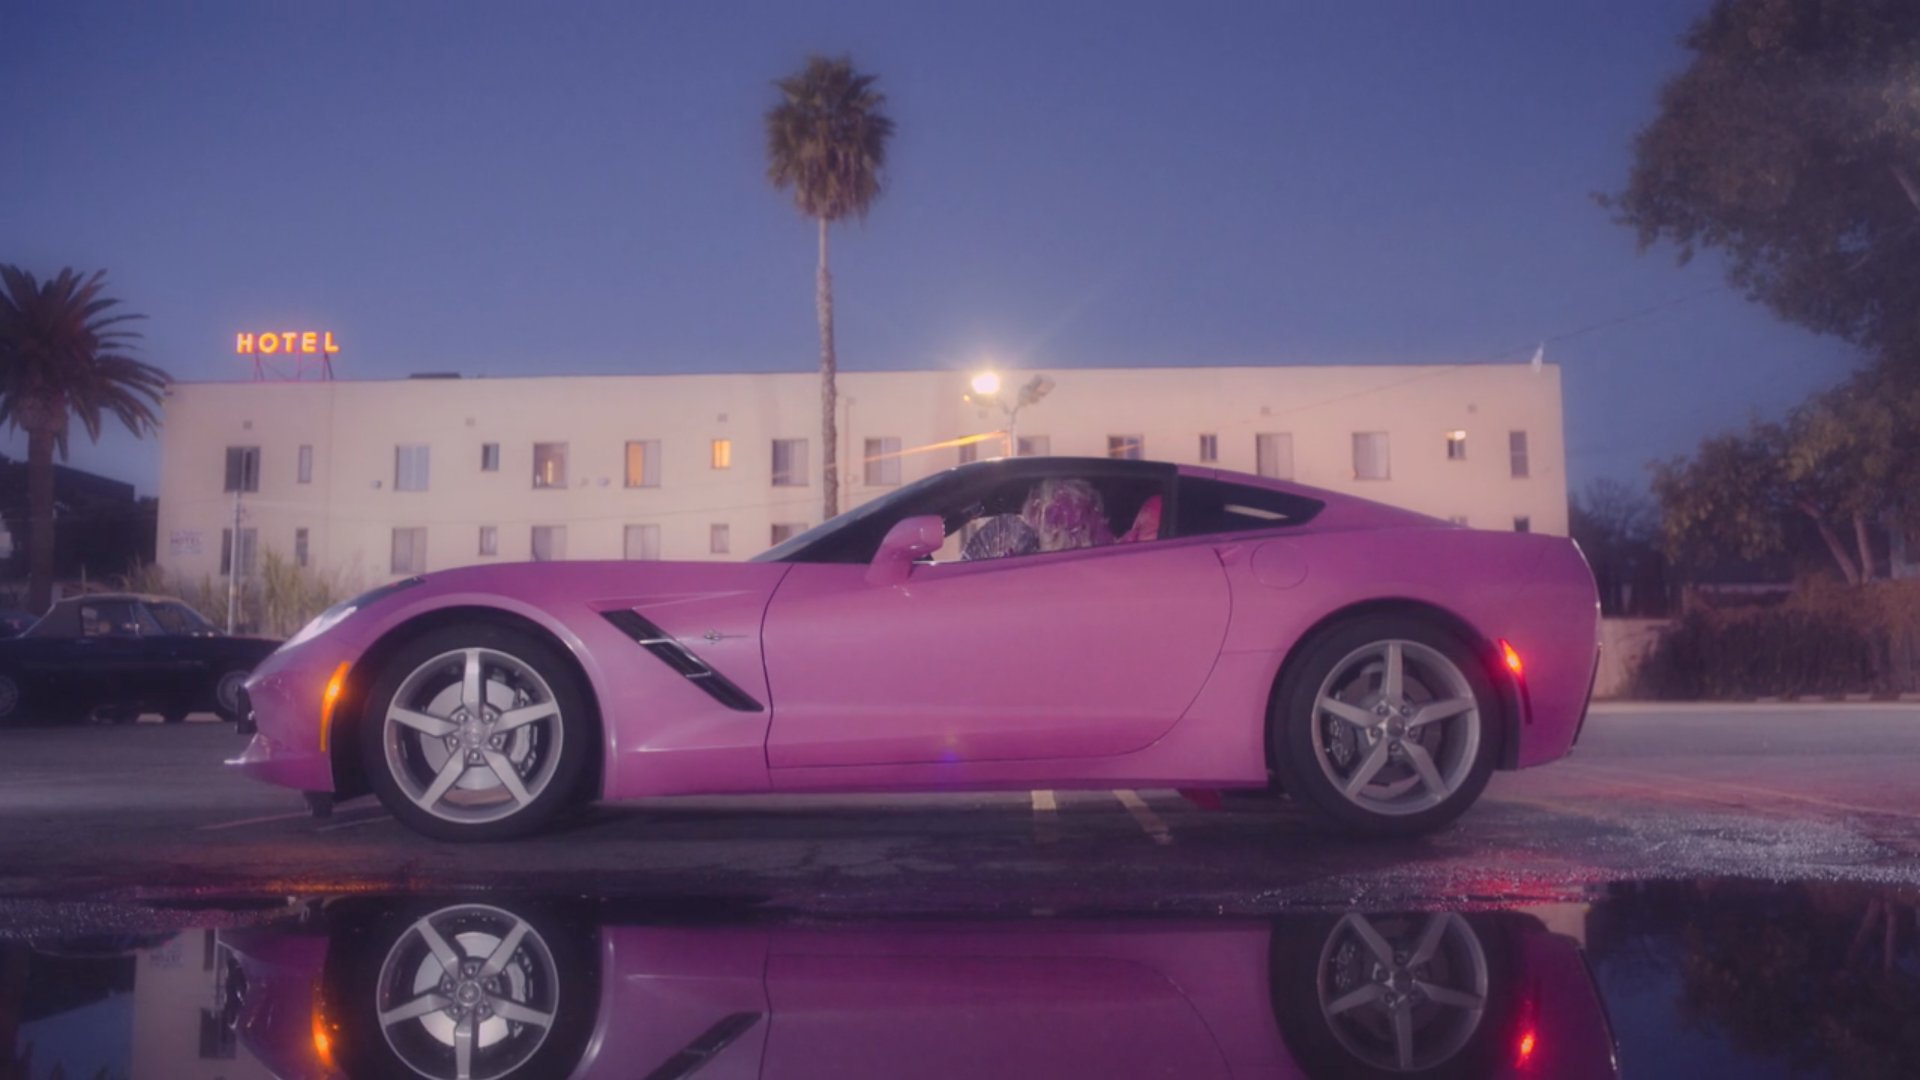 “Find the hot pink corvette, make a wish, and buy a t-shirt! 